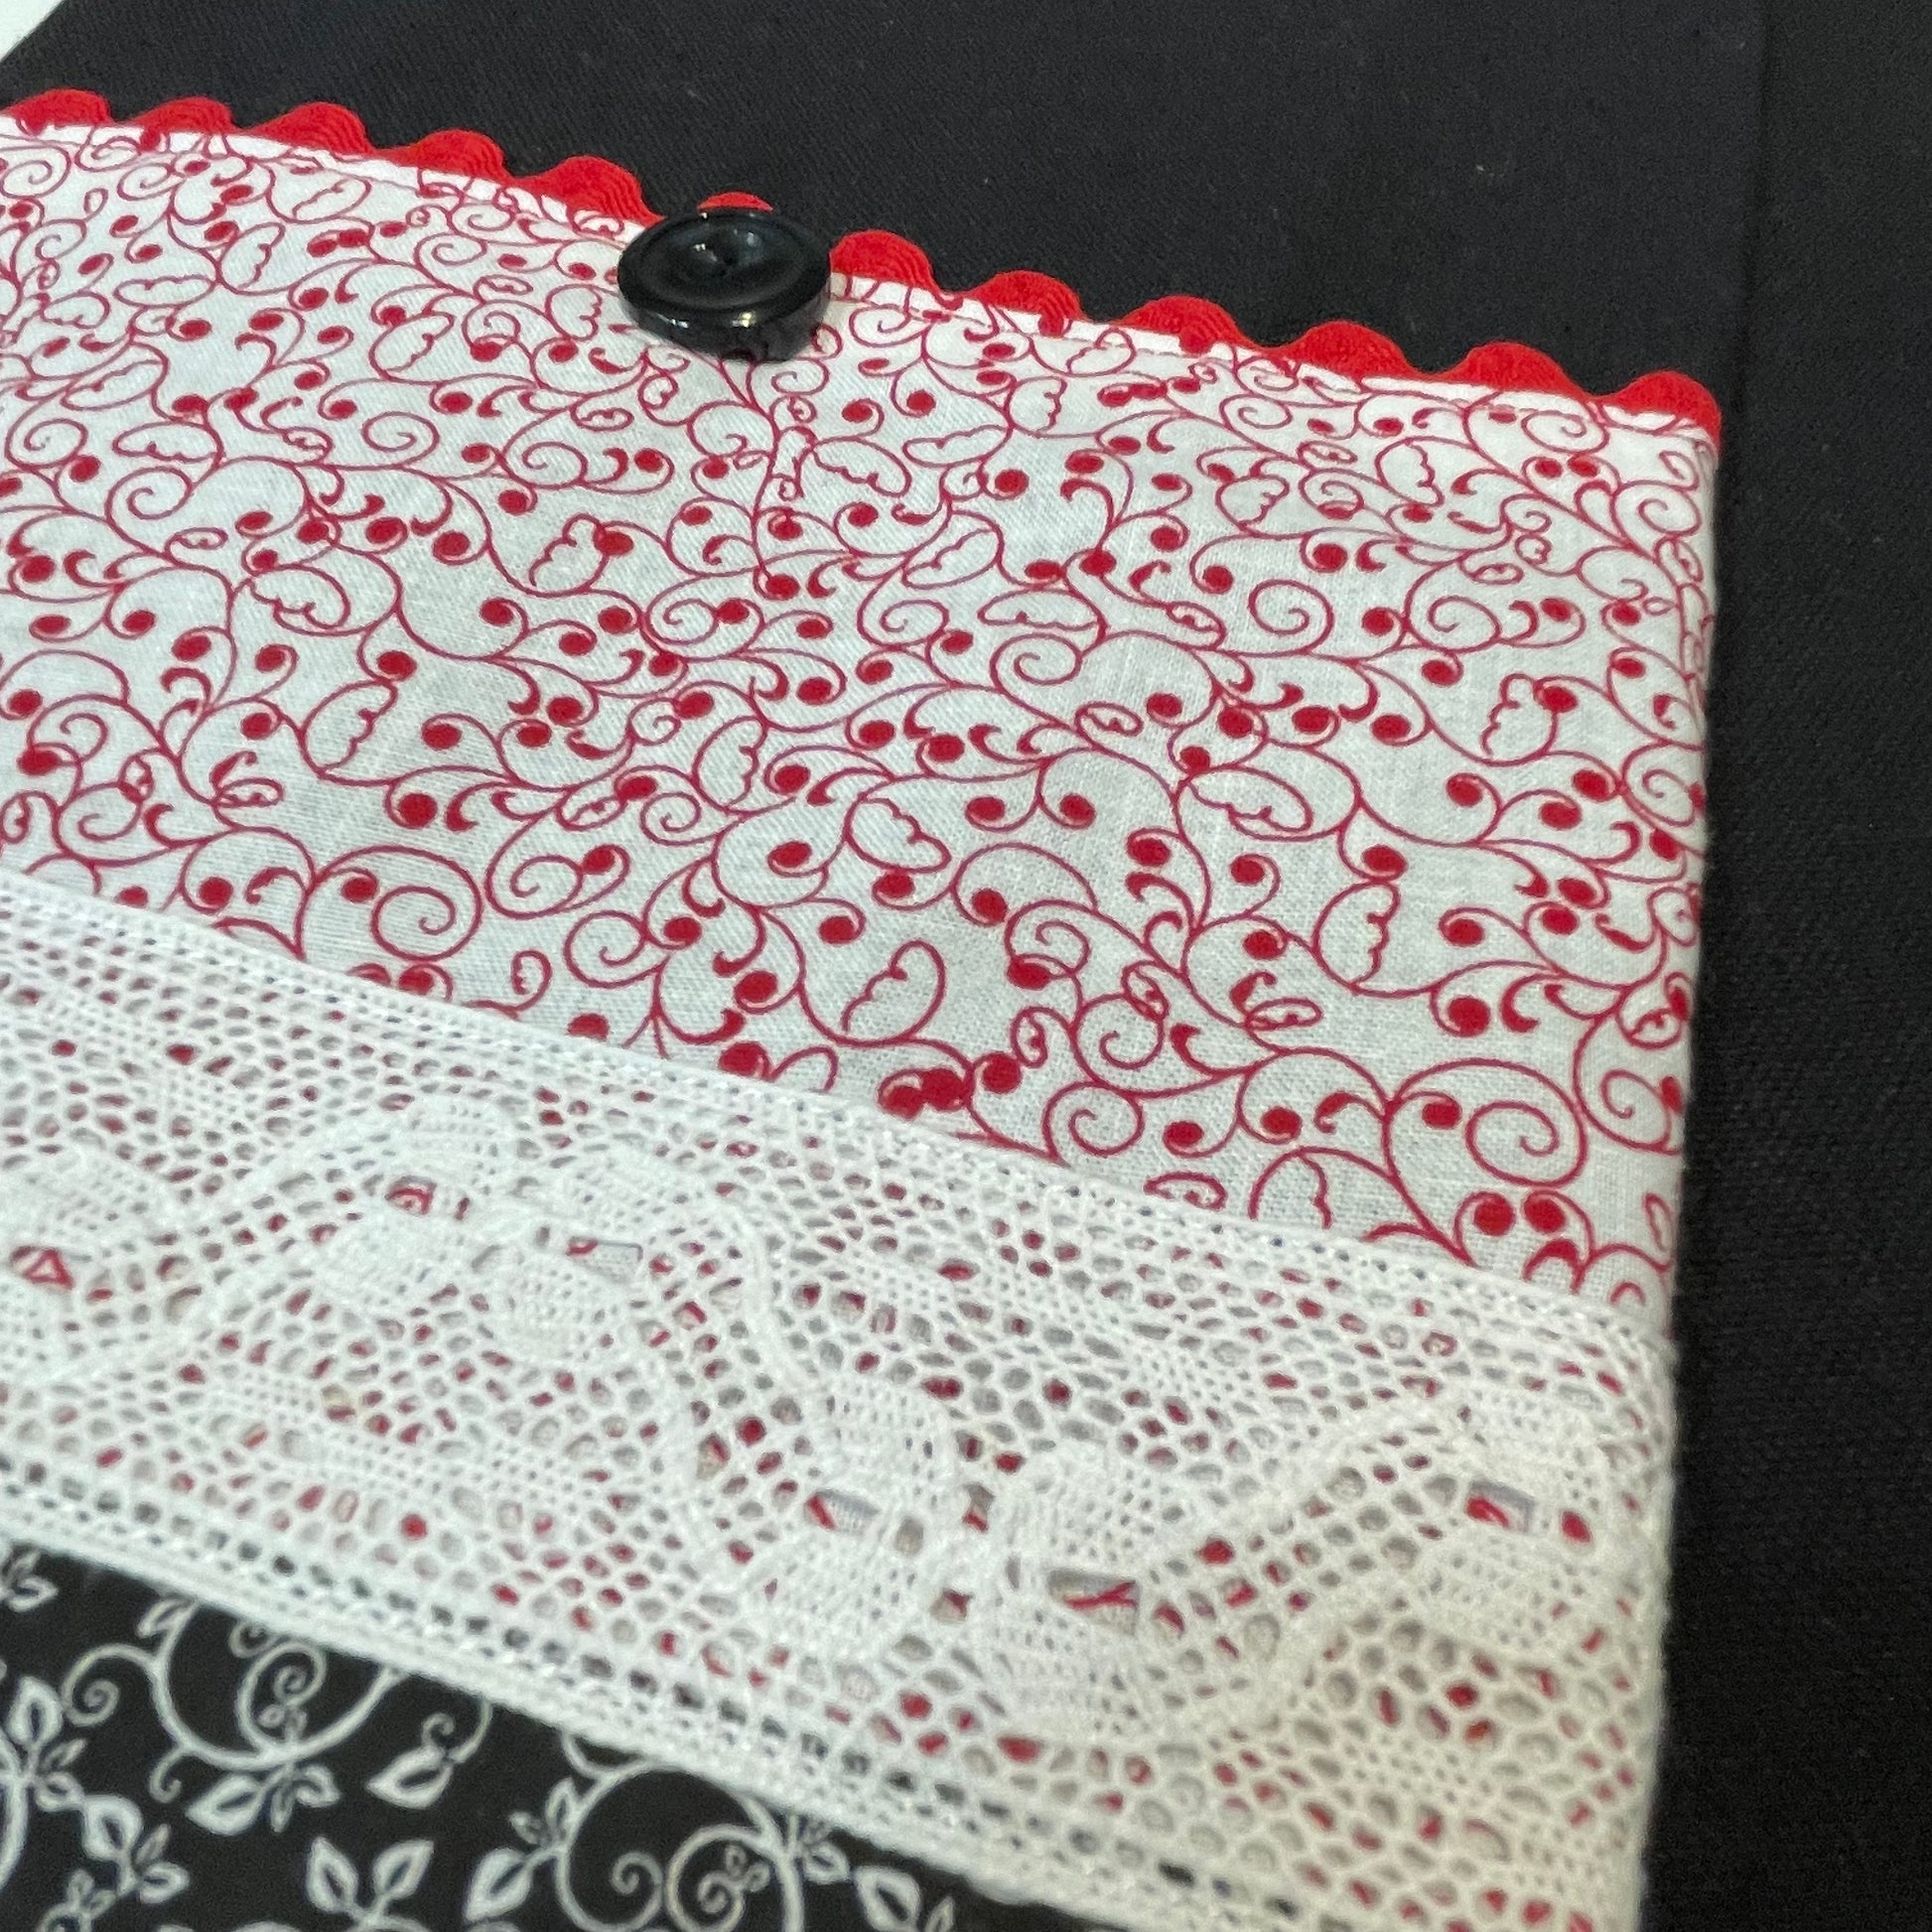 Farmhouse dish towel. Black cotton toweling with quilting cotton accents. Featuring red Ric Rac, wide white polyester lace and button embellishments. Part of a mix and match farmhemian home accents decor line. Browse all the collections online. And be sure to tune into the Home Stitchery Decor YouTube Channel for fabulous fun farmhouse DIY Decor tutorials.